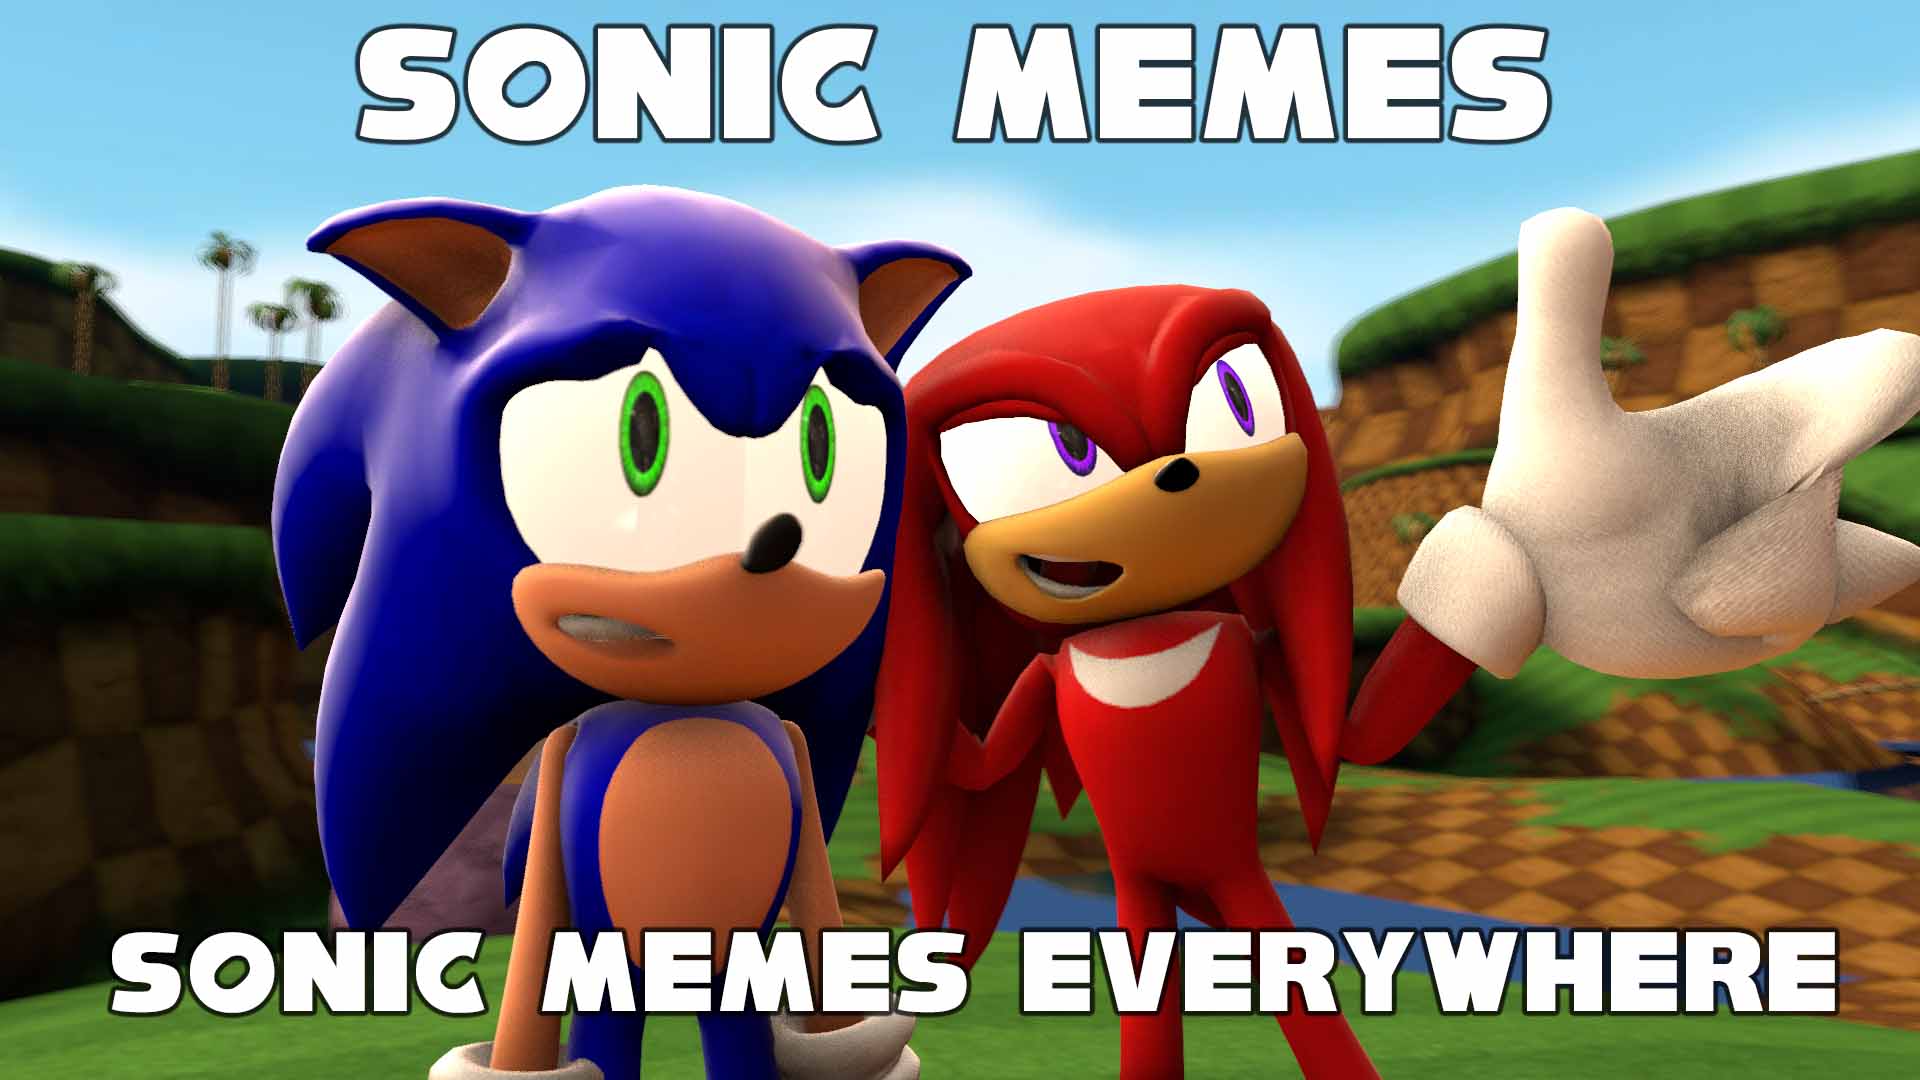 gotta-speed-up-catch-up-and-laugh-at-these-sonic-memes-film-daily